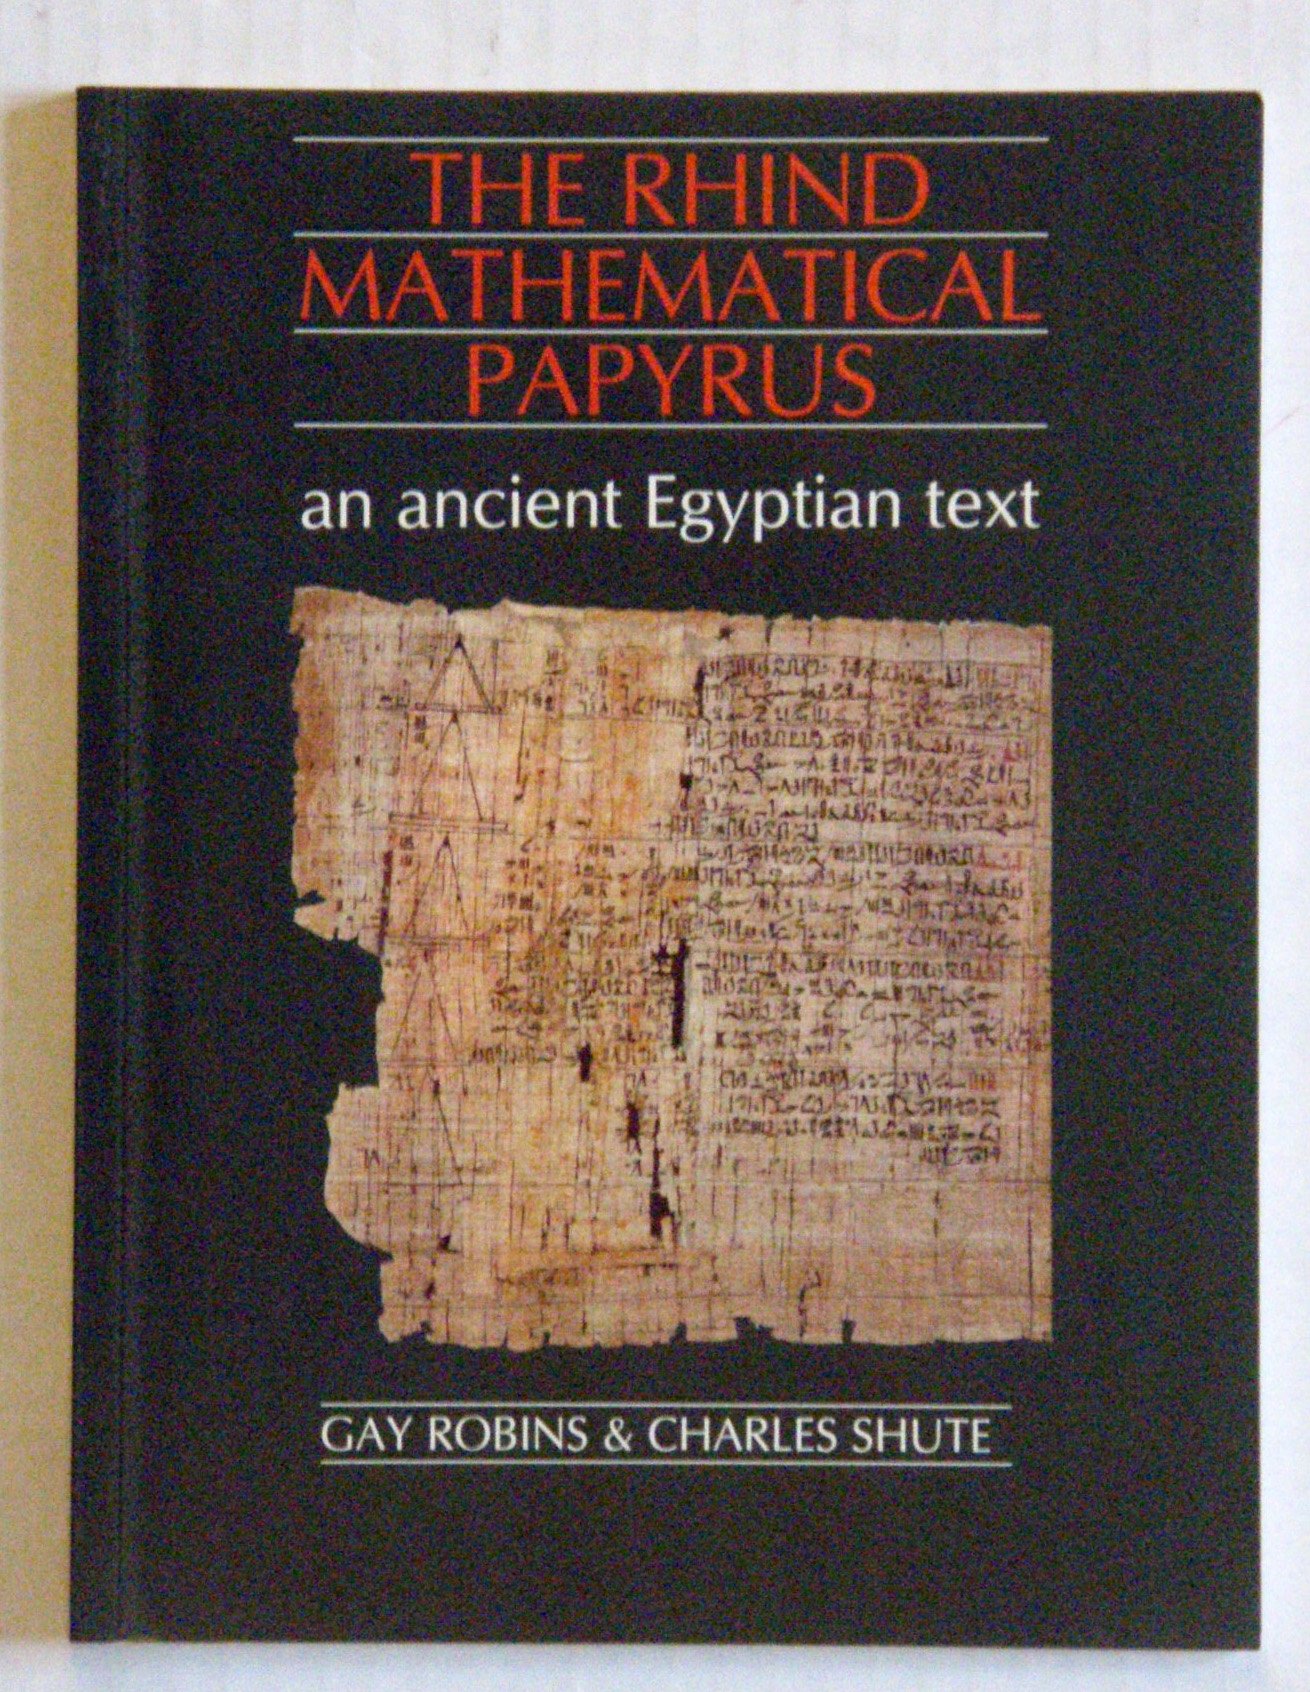 The Rhind mathematical papyrus magazine reviews